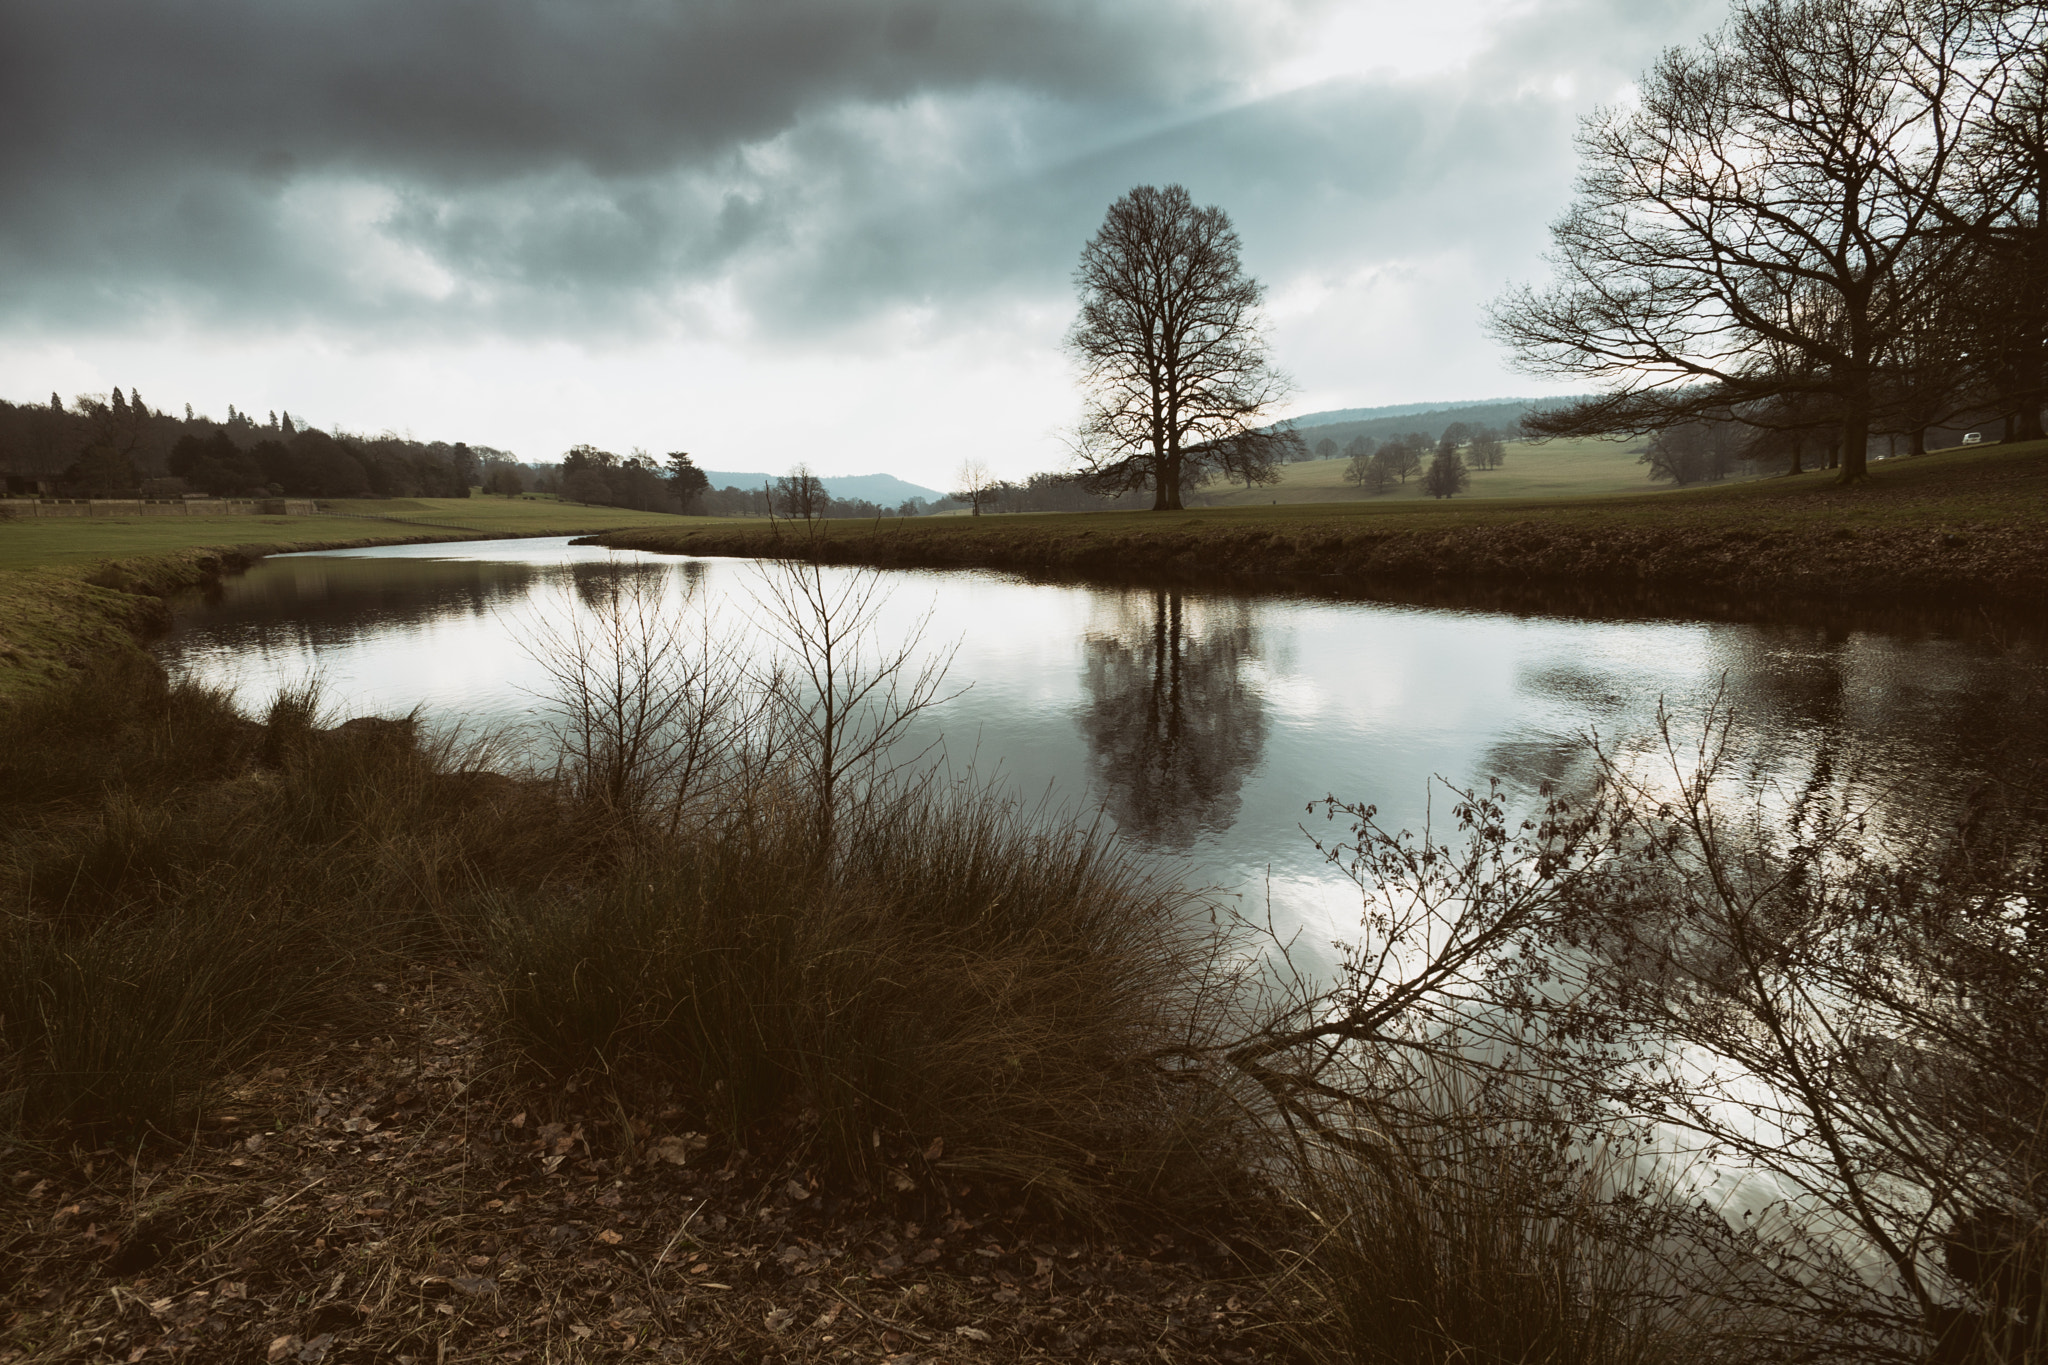 ZEISS Touit 12mm F2.8 sample photo. Chatsworth house, the peak district | uk photography